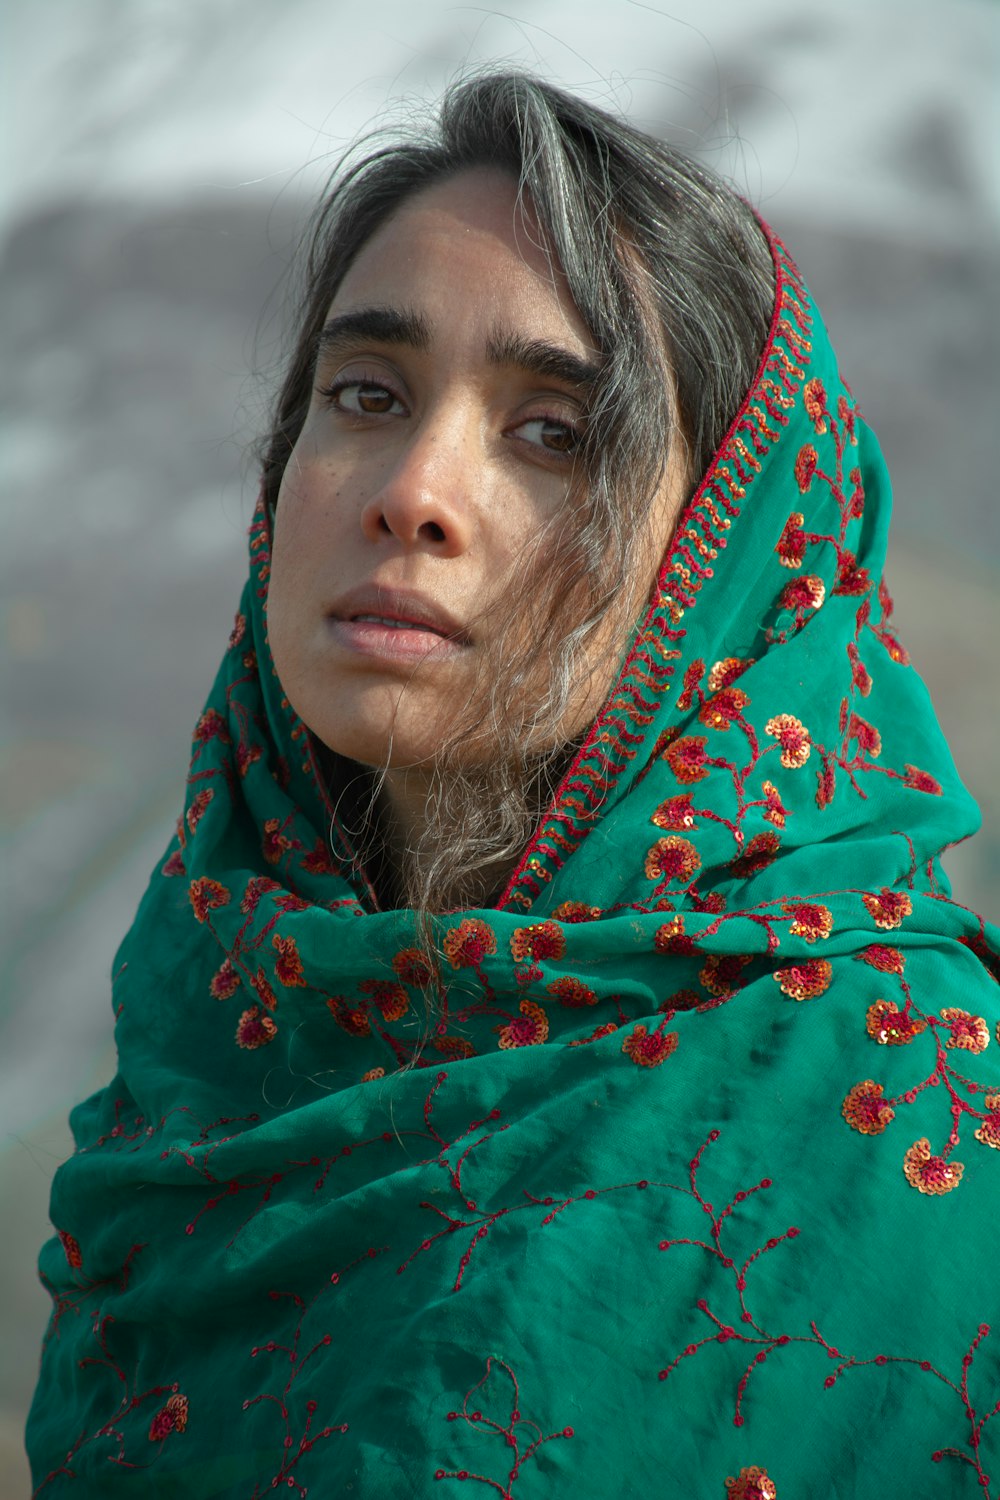 a woman wearing a green shawl with red flowers on it